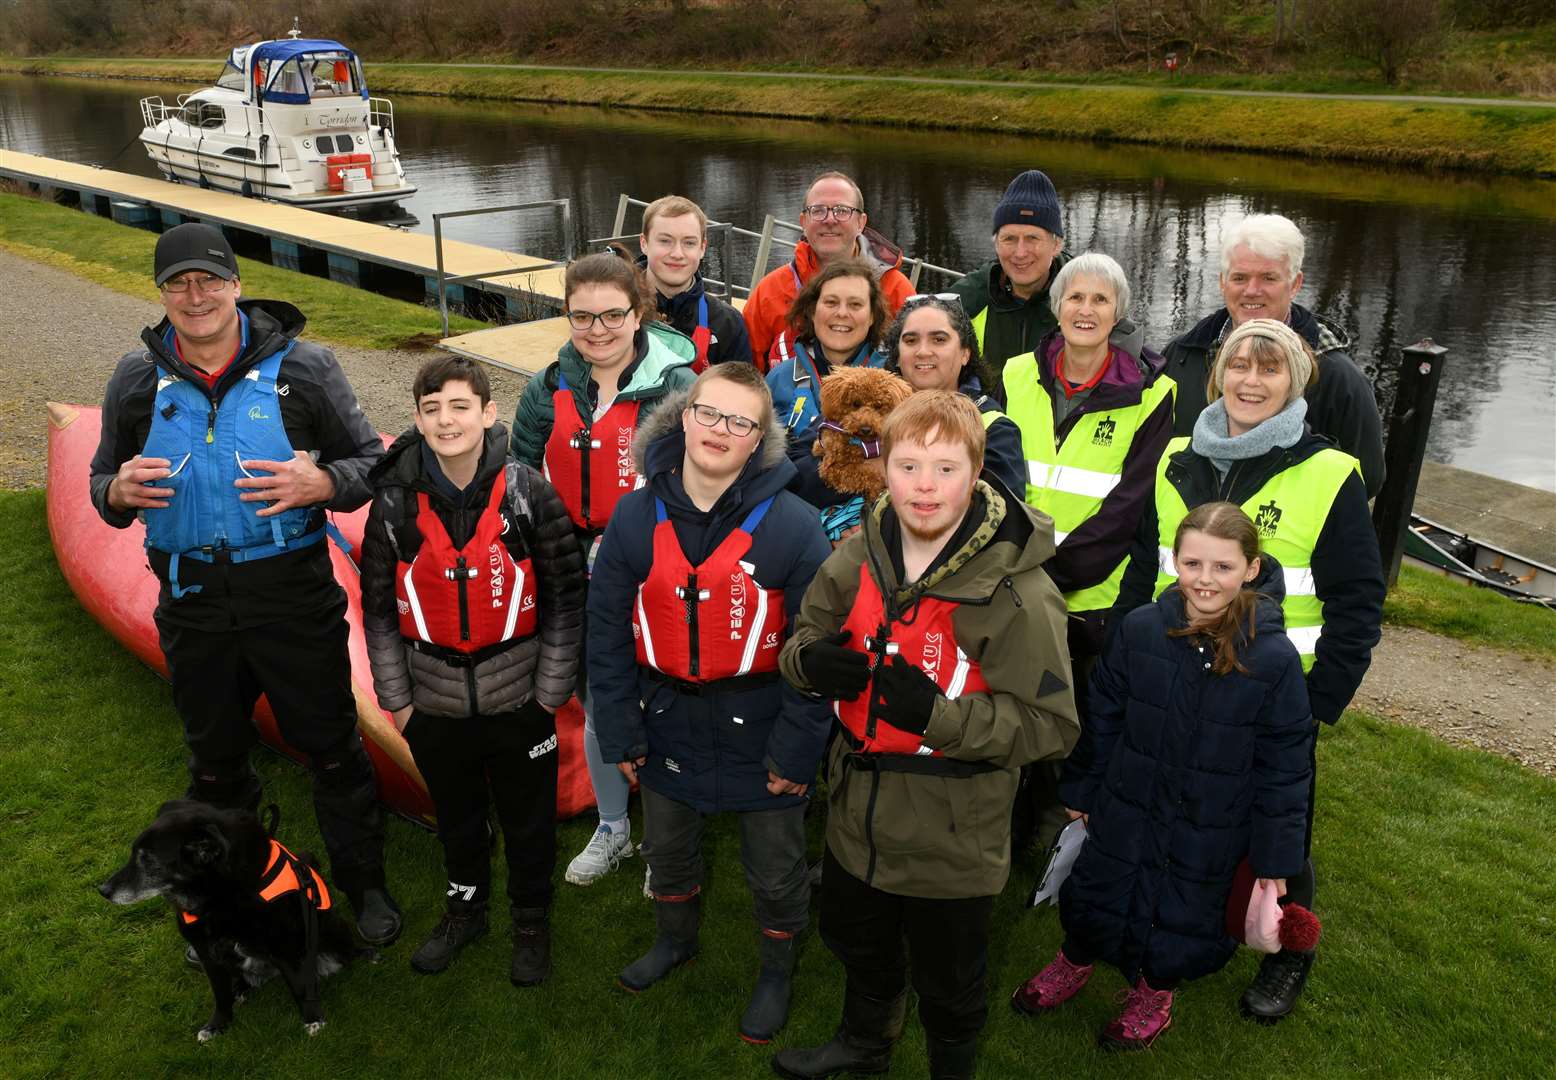 Reach4Reality family fun day at Dochgarroch Locks group photo. Picture: James Mackenzie.